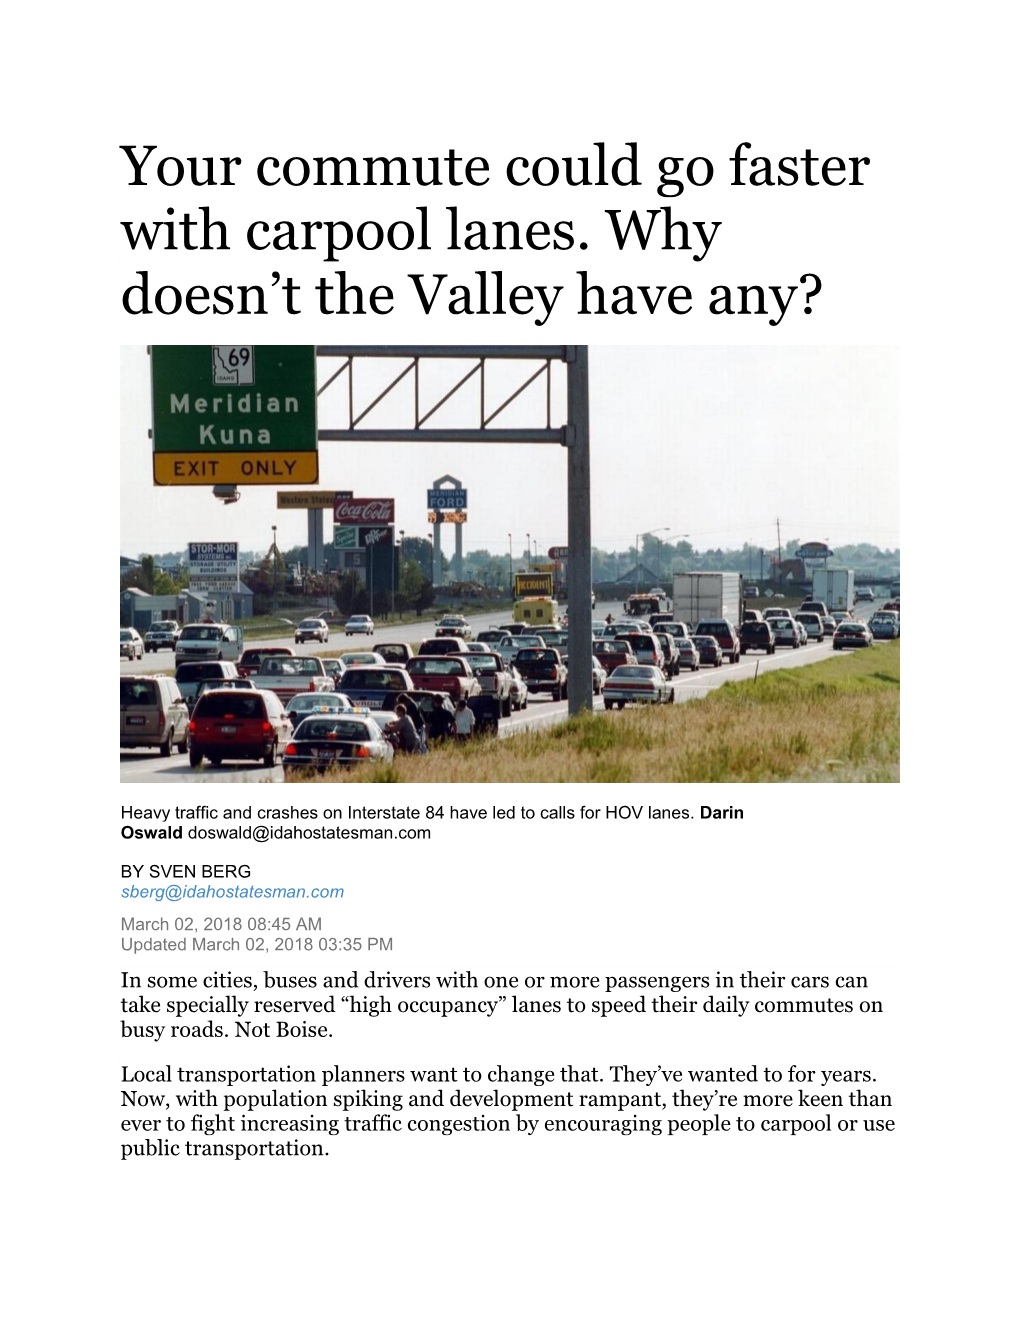 Your Commute Could Go Faster with Carpool Lanes. Why Doesn't The